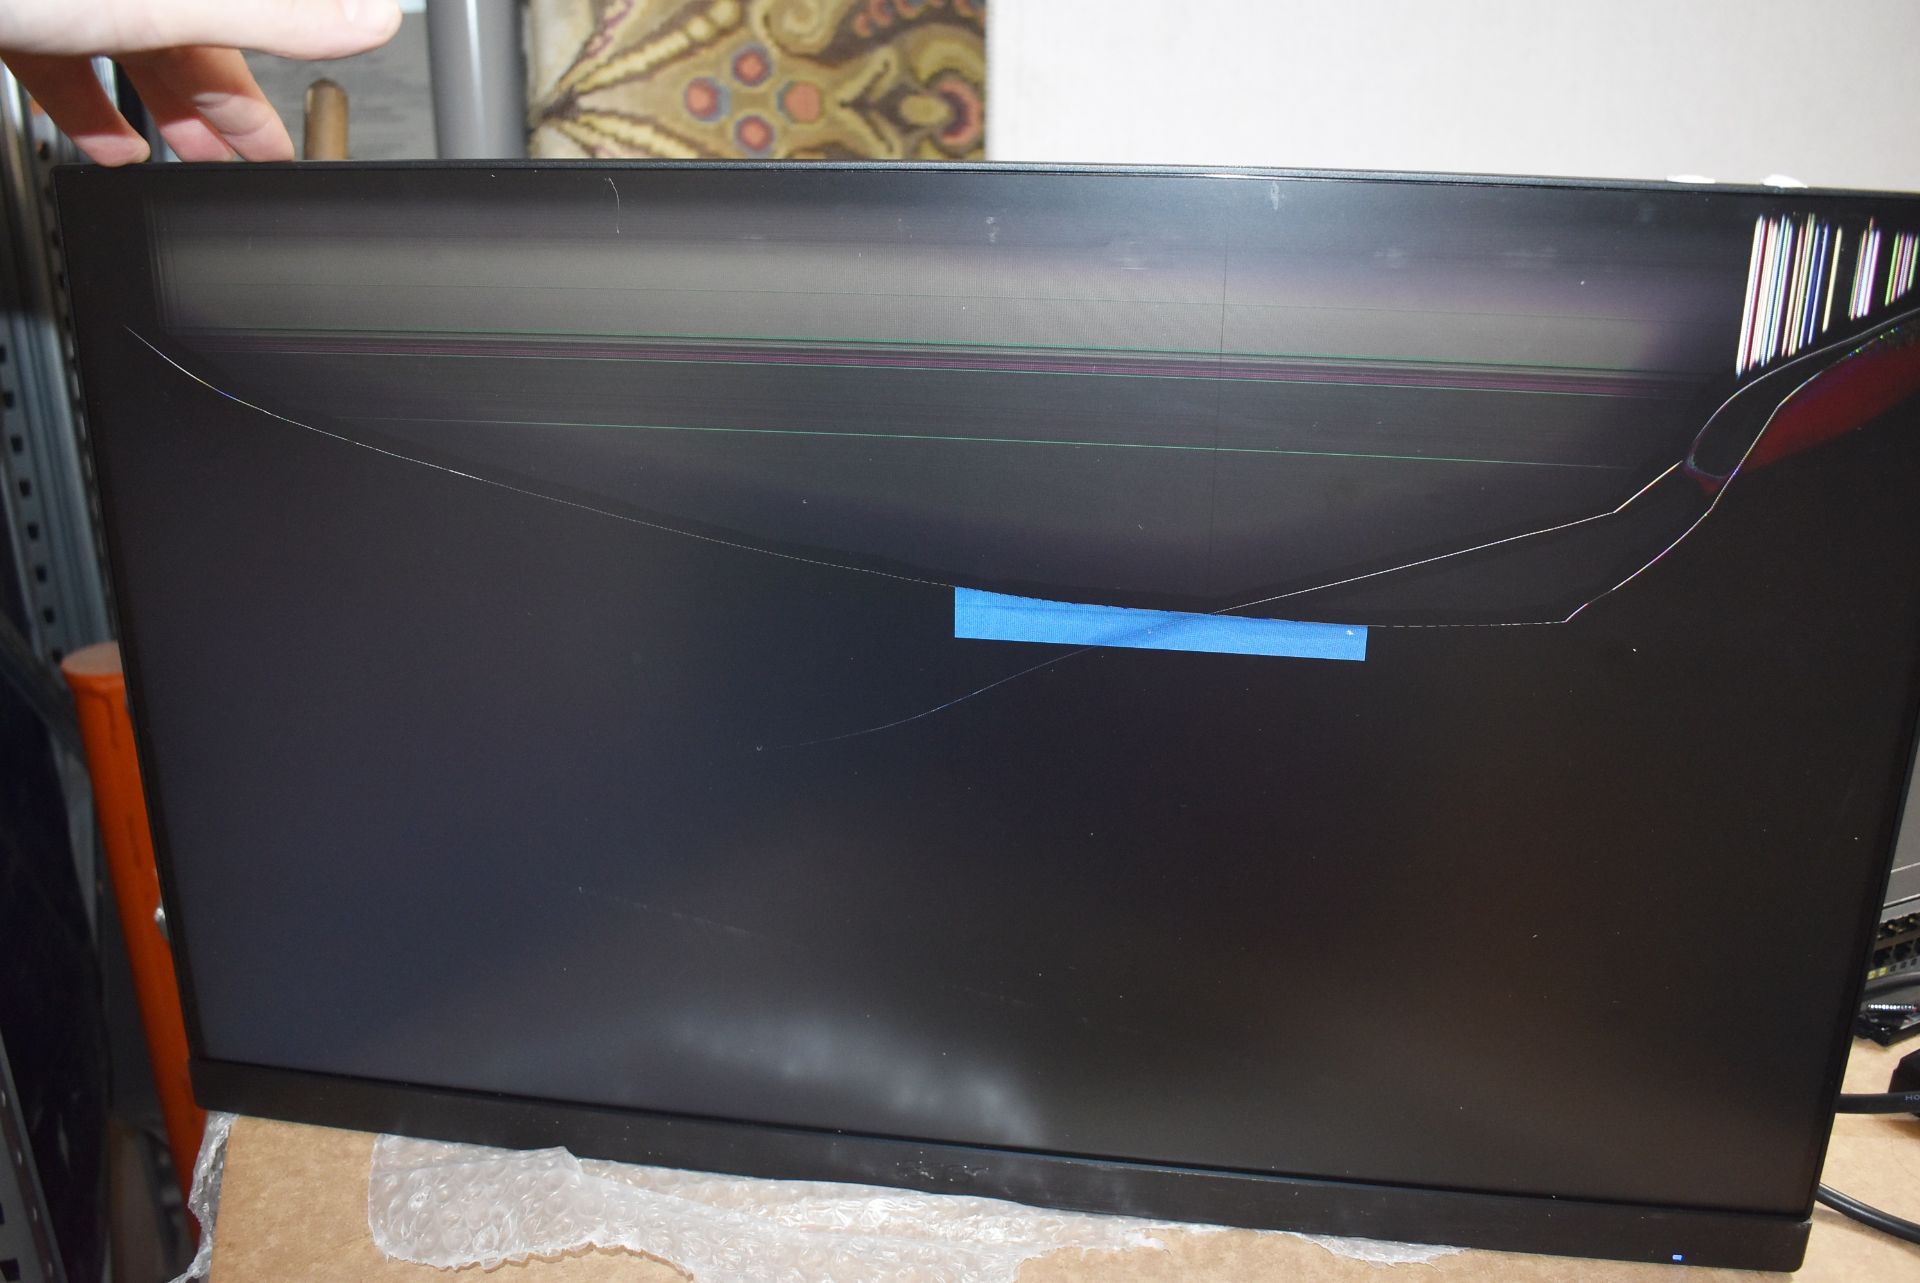 15 x Acer 27 Inch FHD Monitors - Model ET271 - Spares or Repairs With Damaged Screens - Ref: - Image 7 of 22